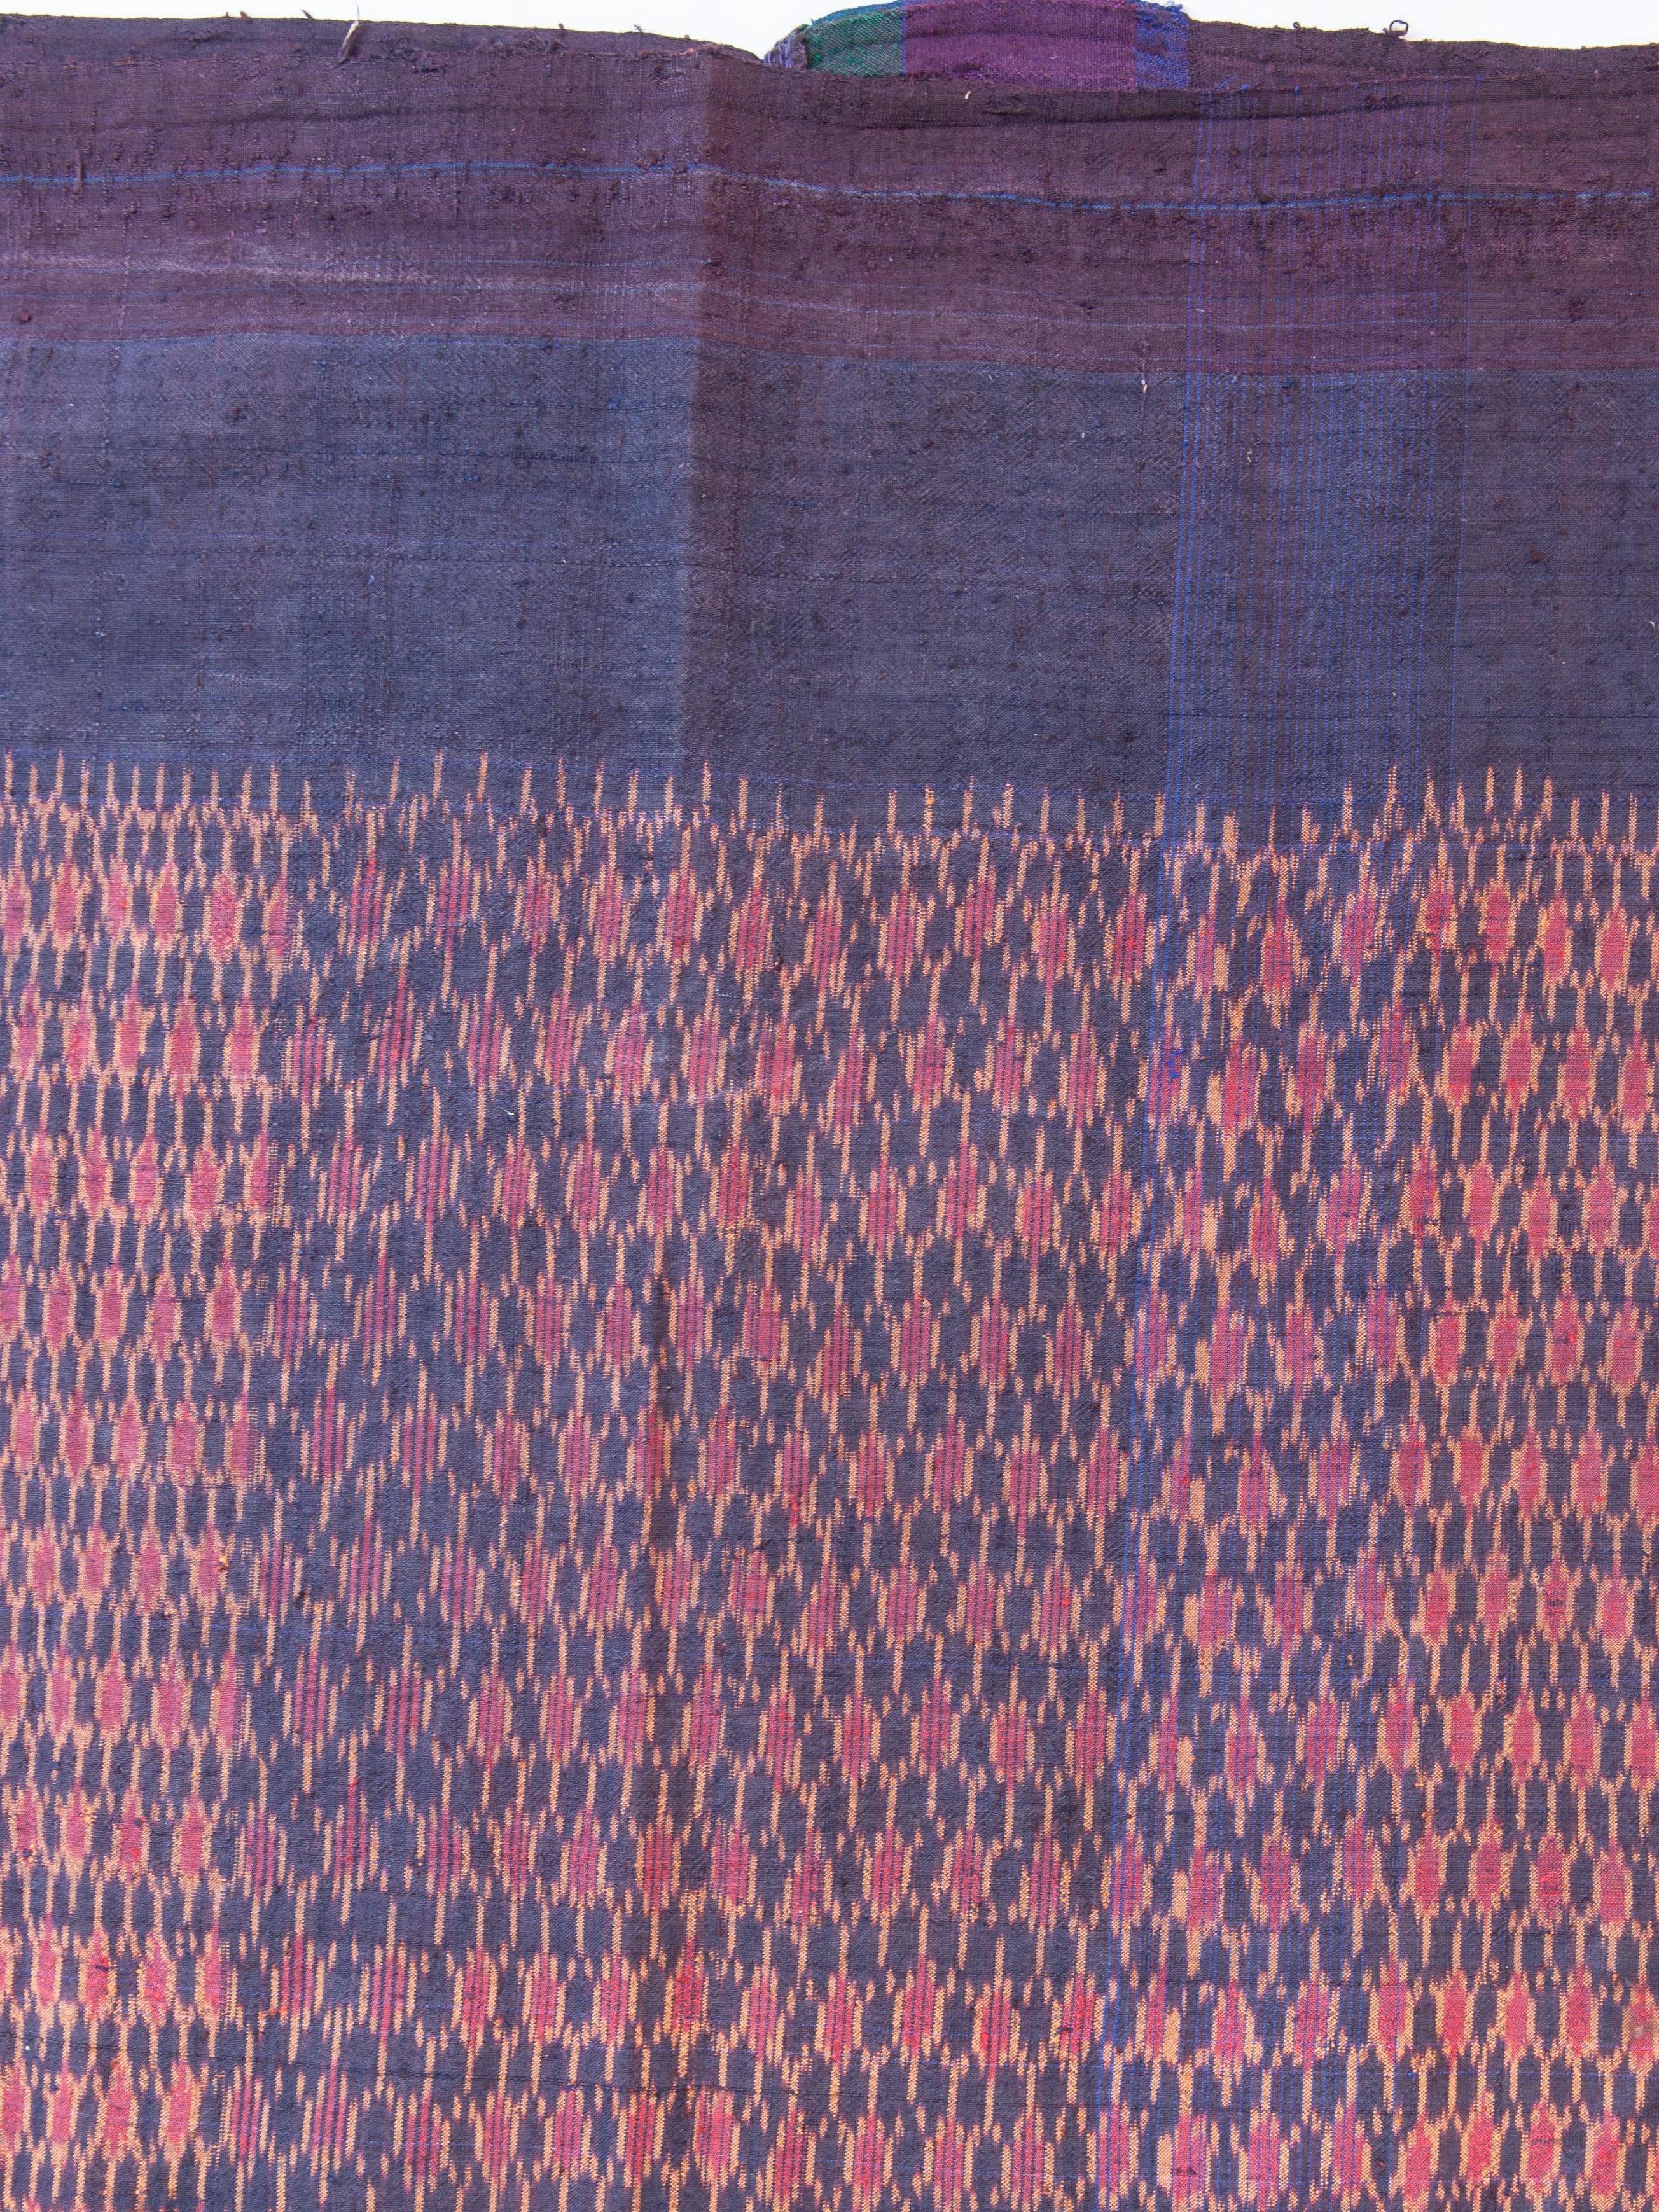 Tribal Vintage Silk Ikat Sarong from Northeast Thailand or Cambodia, Mid-20th Century